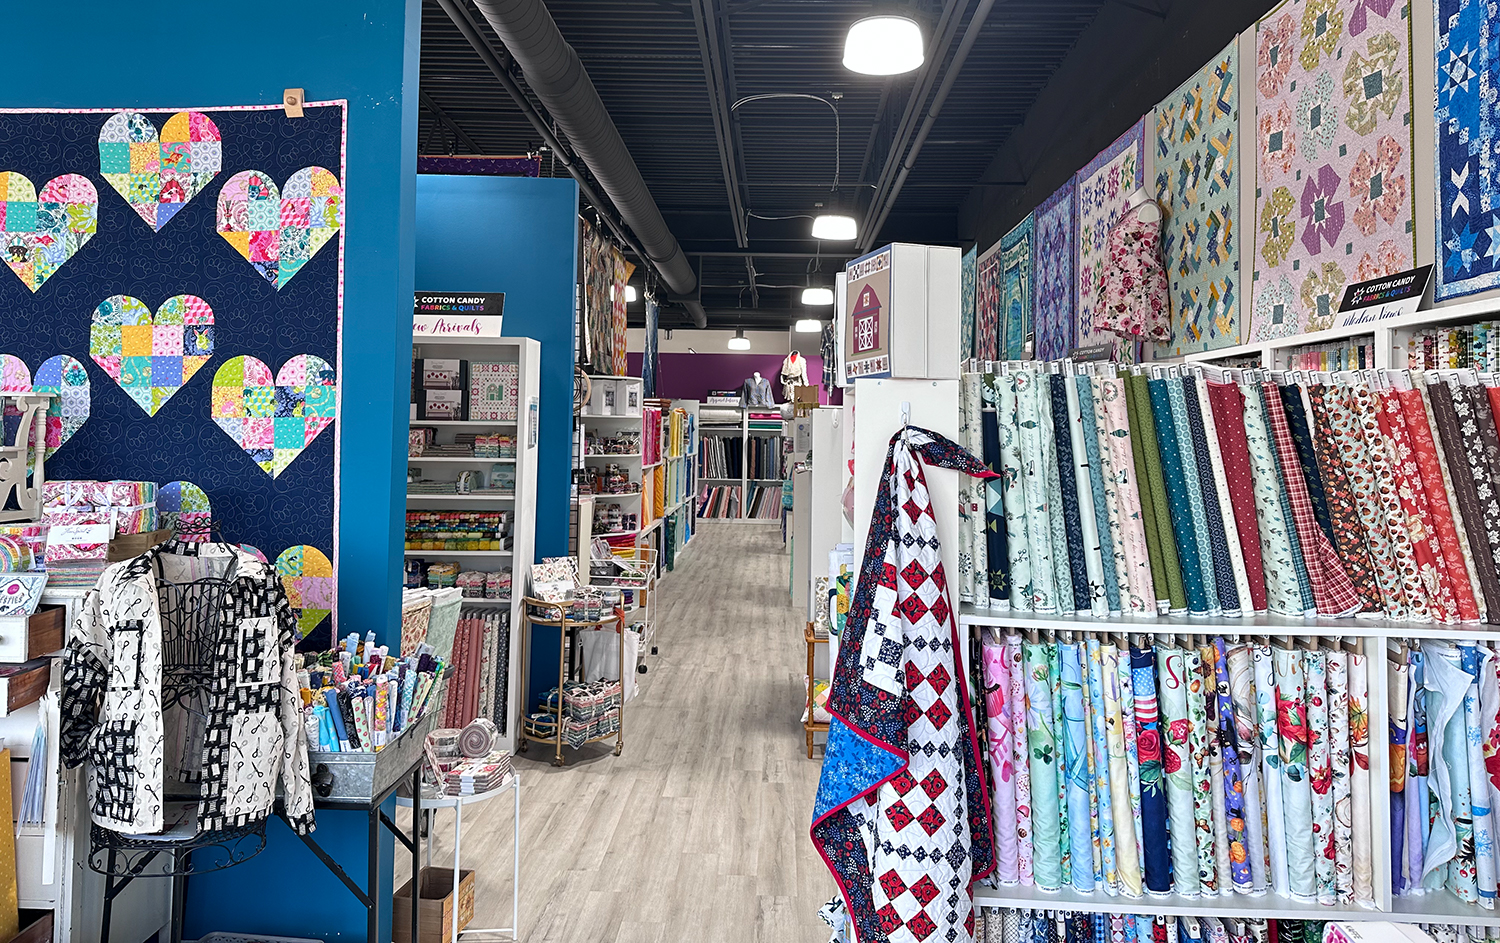 looking down an aisle of a quilt shop with lots of fabric and quilts